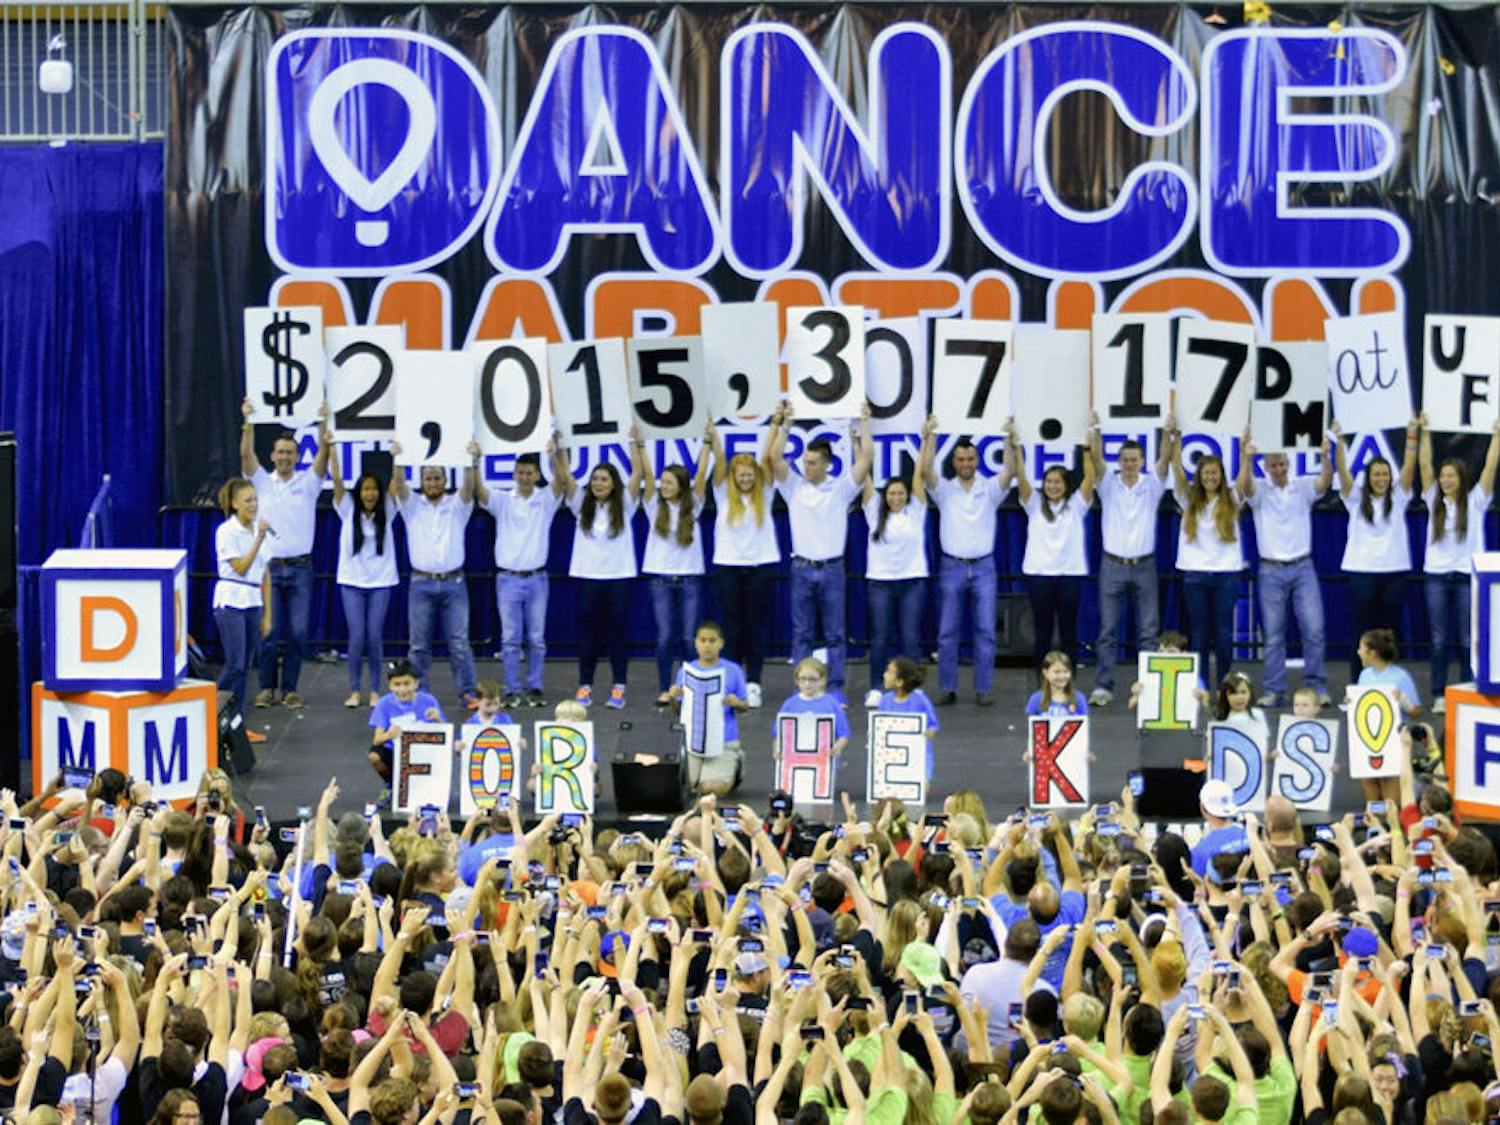 Students celebrate in the O'Connell Center on Sunday after hearing that Dance Marathon participants raised a record-breaking $2,015,307.17 to benefit UF Health Shands Children's Hospital. Dance Marathon at the University of Florida is an annual 26.2-hour event where hundreds of students stay awake and "stand for those who can't," to raise money for Children's Miracle Network Hospitals.